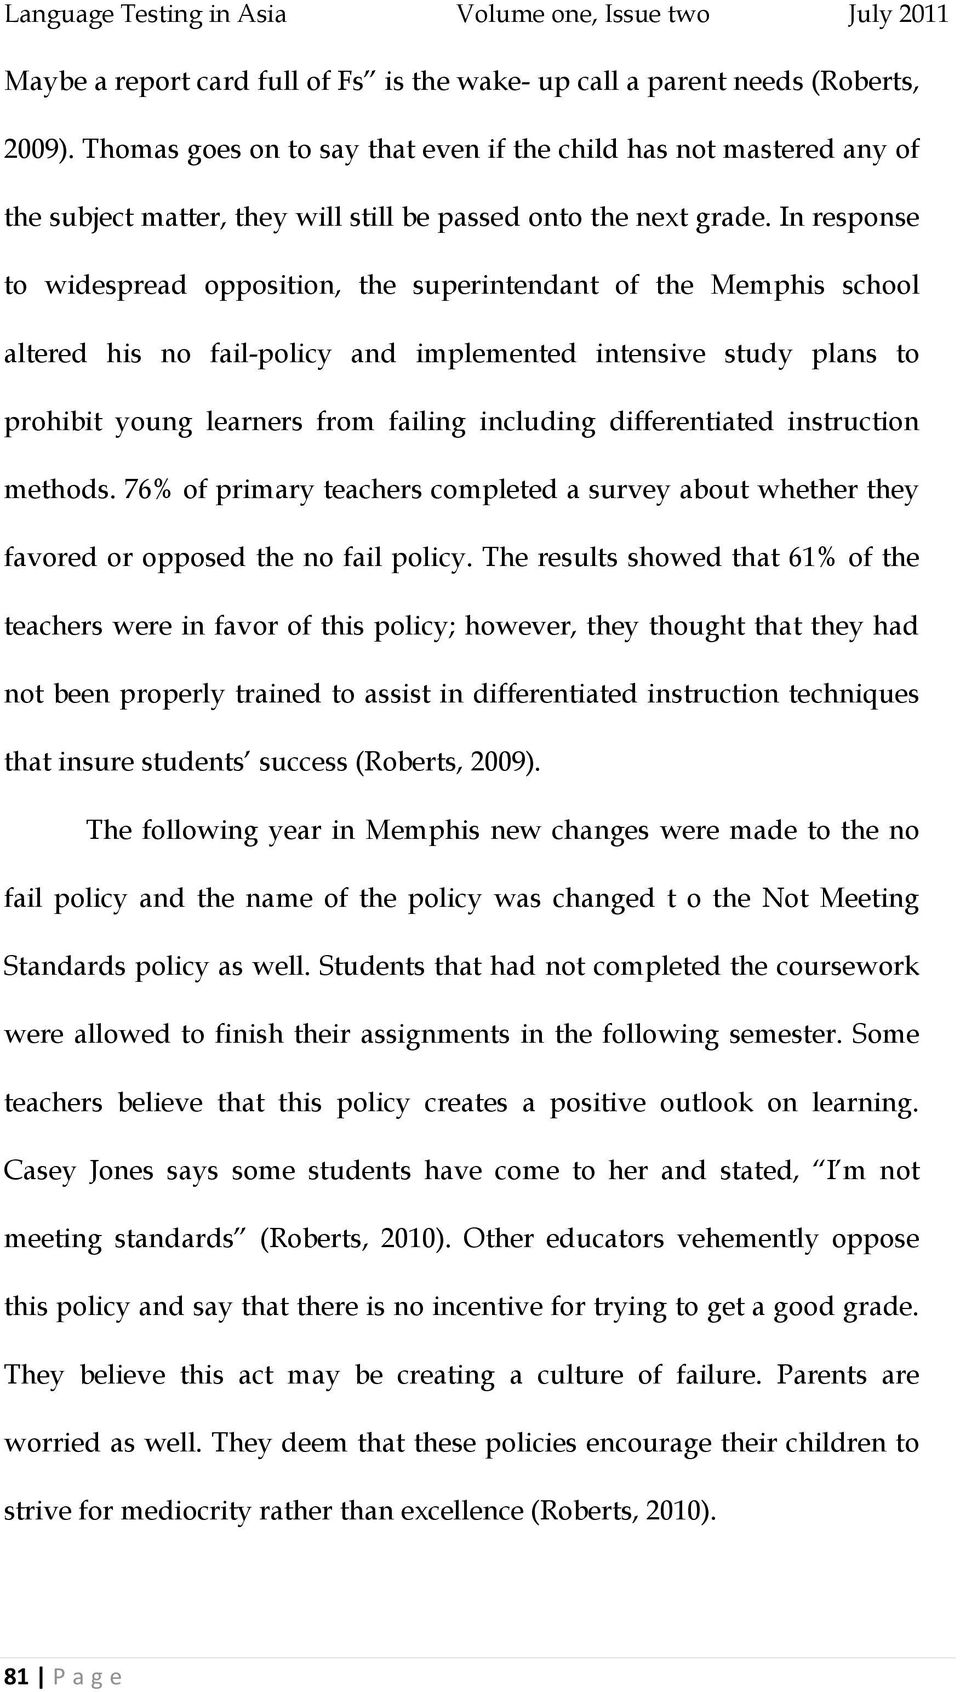 In response to widespread opposition, the superintendant of the Memphis school altered his no fail-policy and implemented intensive study plans to prohibit young learners from failing including